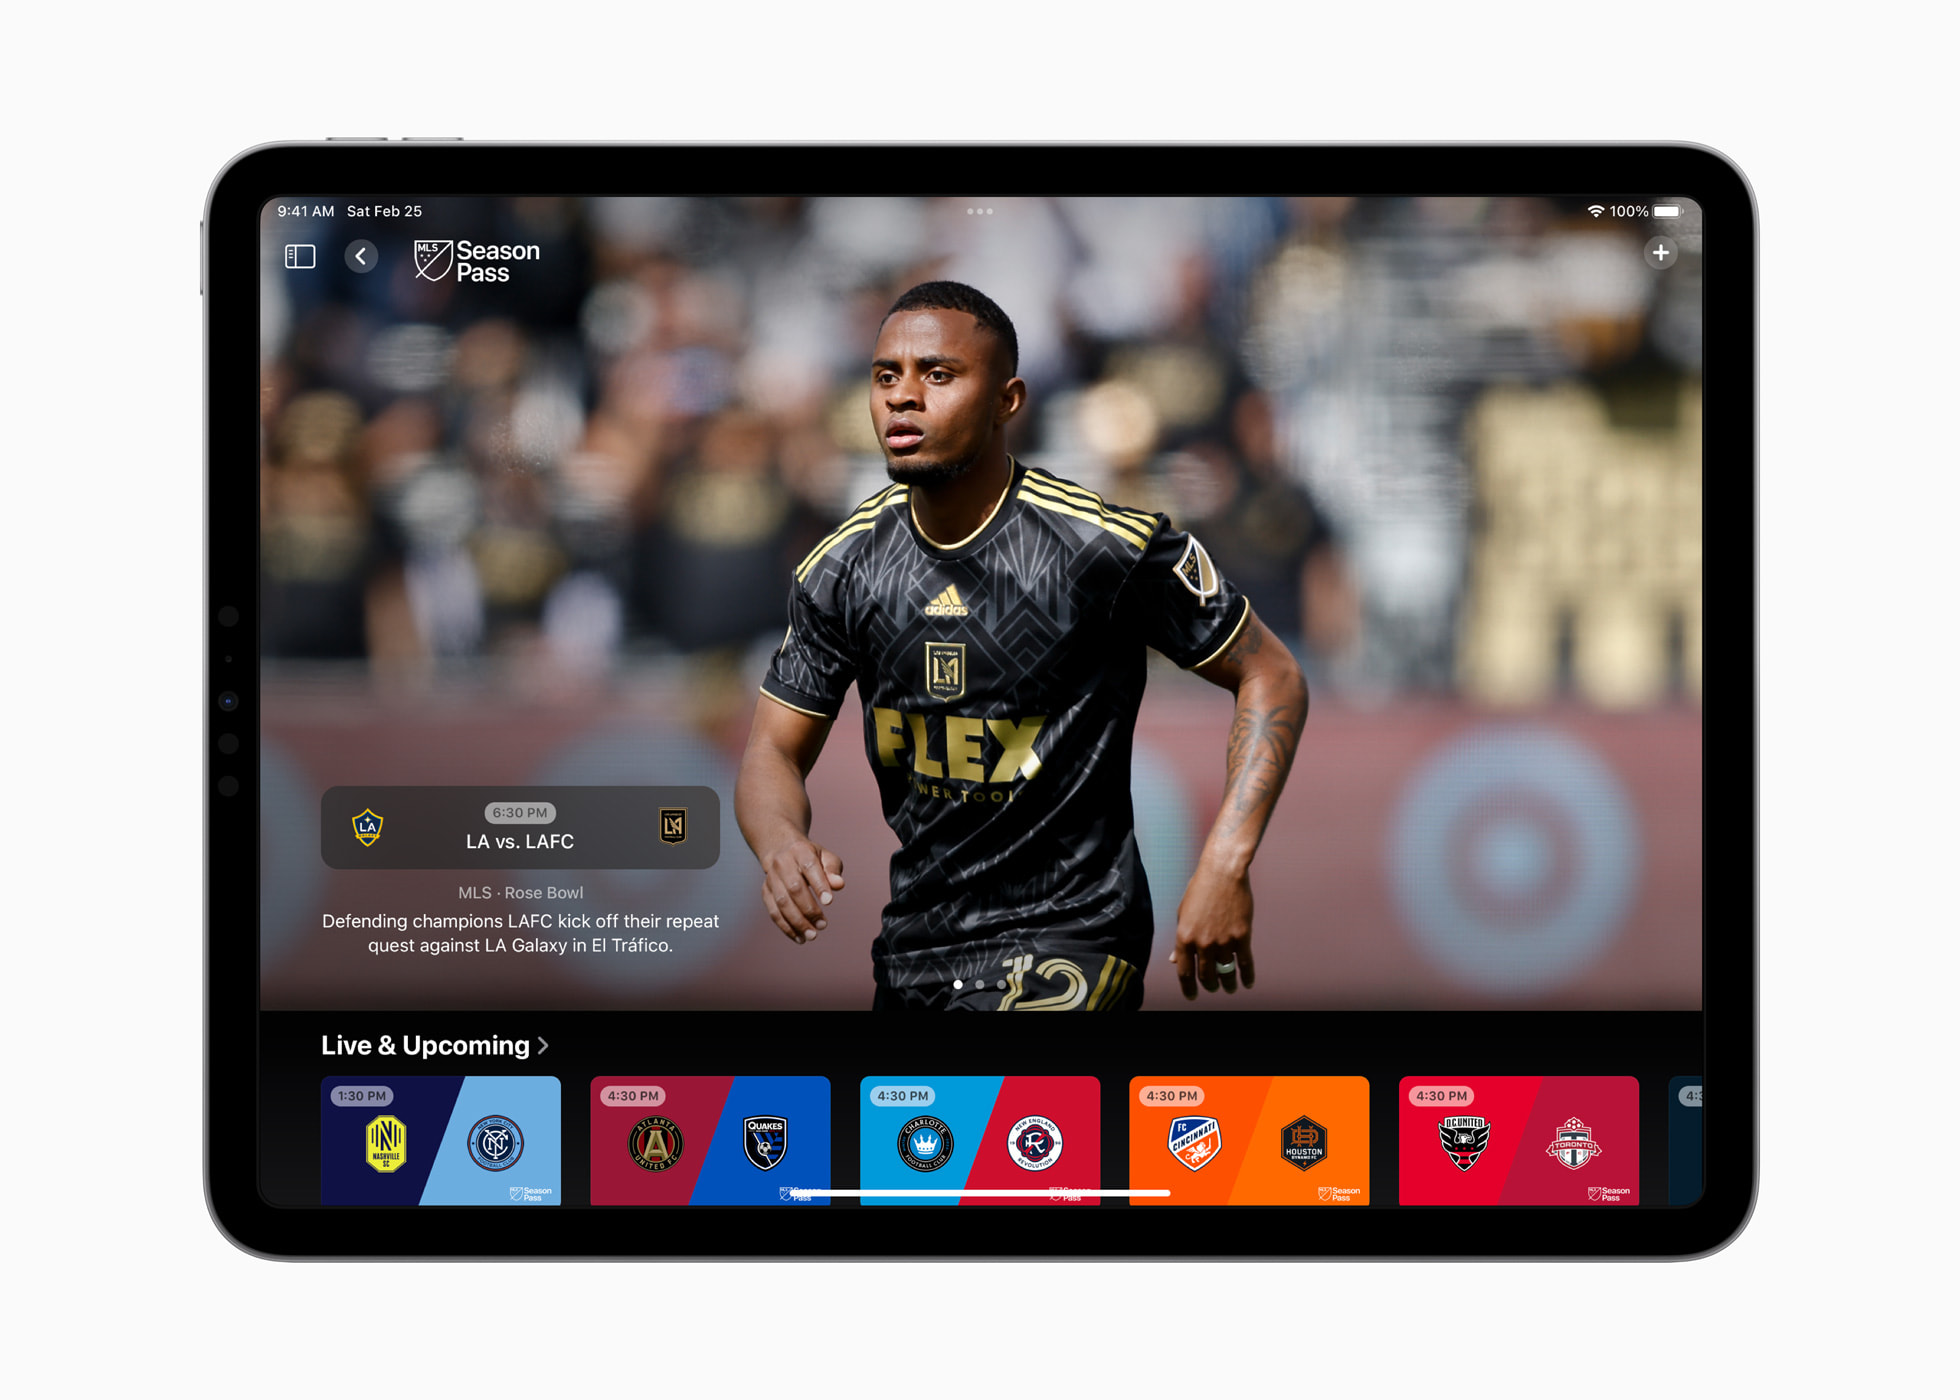 MLS Pass is now available worldwide on the Apple TV Apple